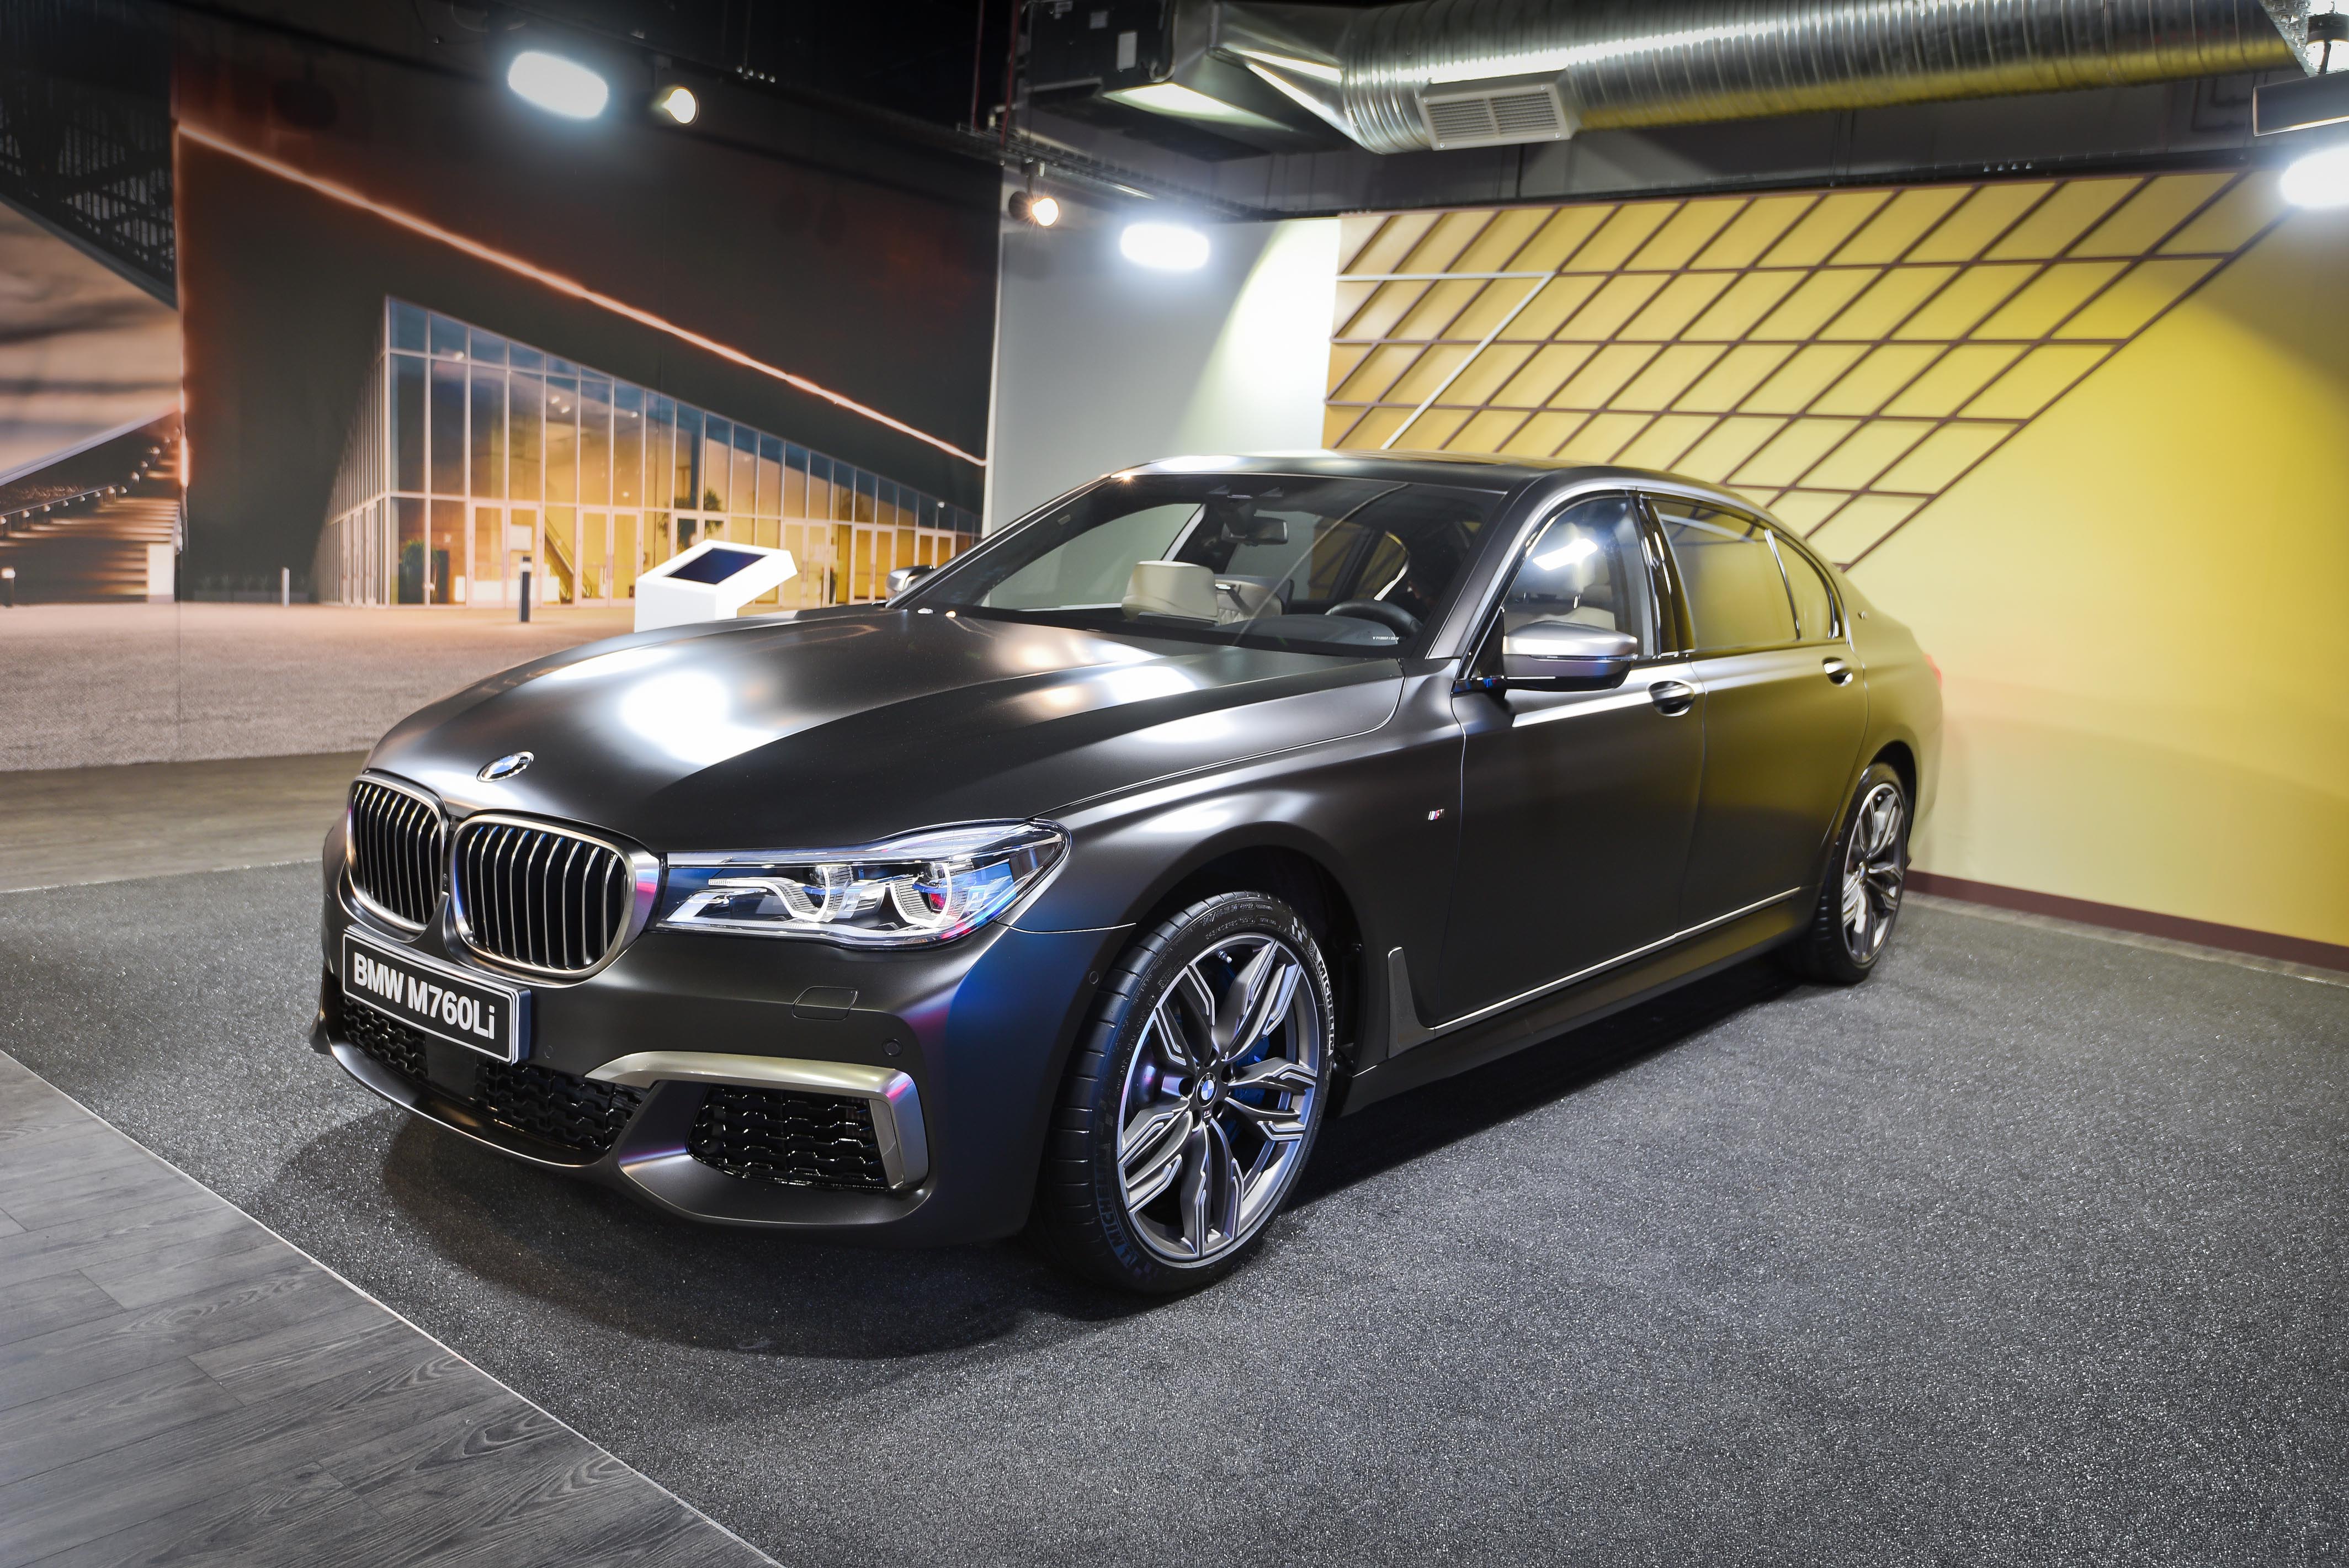 bmw-south-africa-presents-the-new-bmw-m760li-xdrive-to-a-specialist-audience-and-media-1